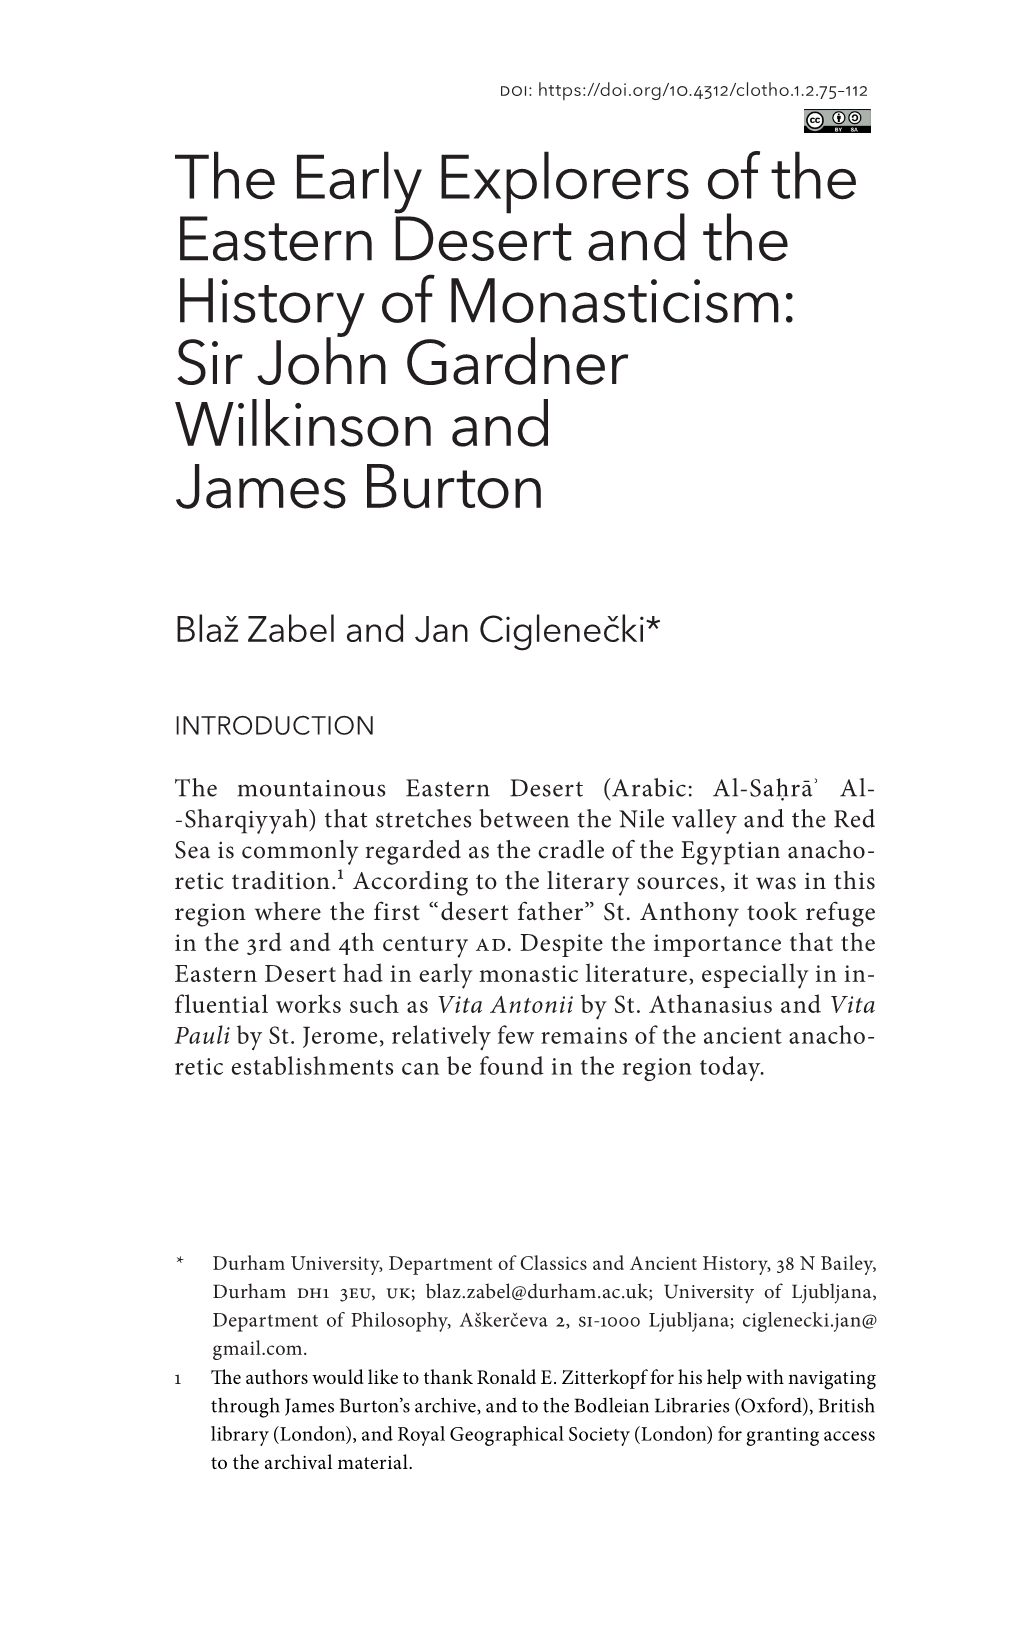 The Early Explorers of the Eastern Desert and the History of Monasticism: Sir John Gardner Wilkinson and James Burton